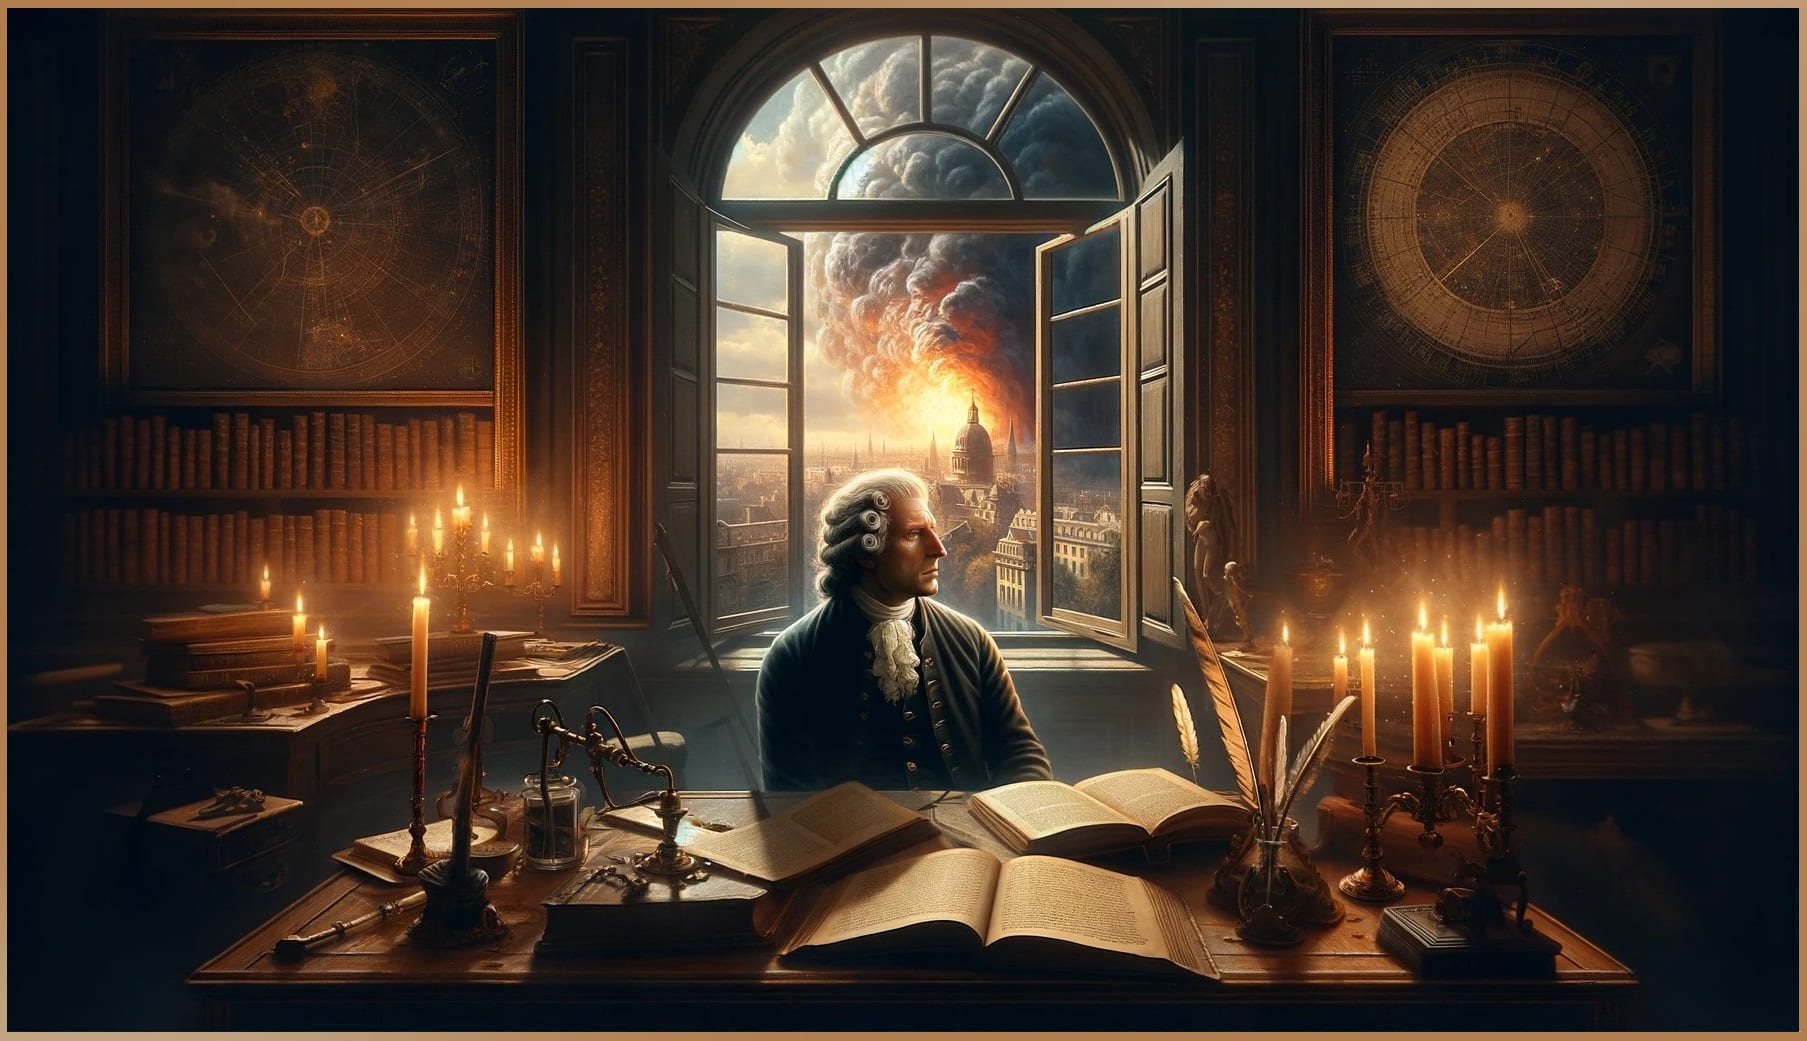 Artistic depiction of Emanuel Swedenborg in his study, with a vision of a distant fire in the background, representing his famed intuitive perception of an event hundreds of kilometers away.